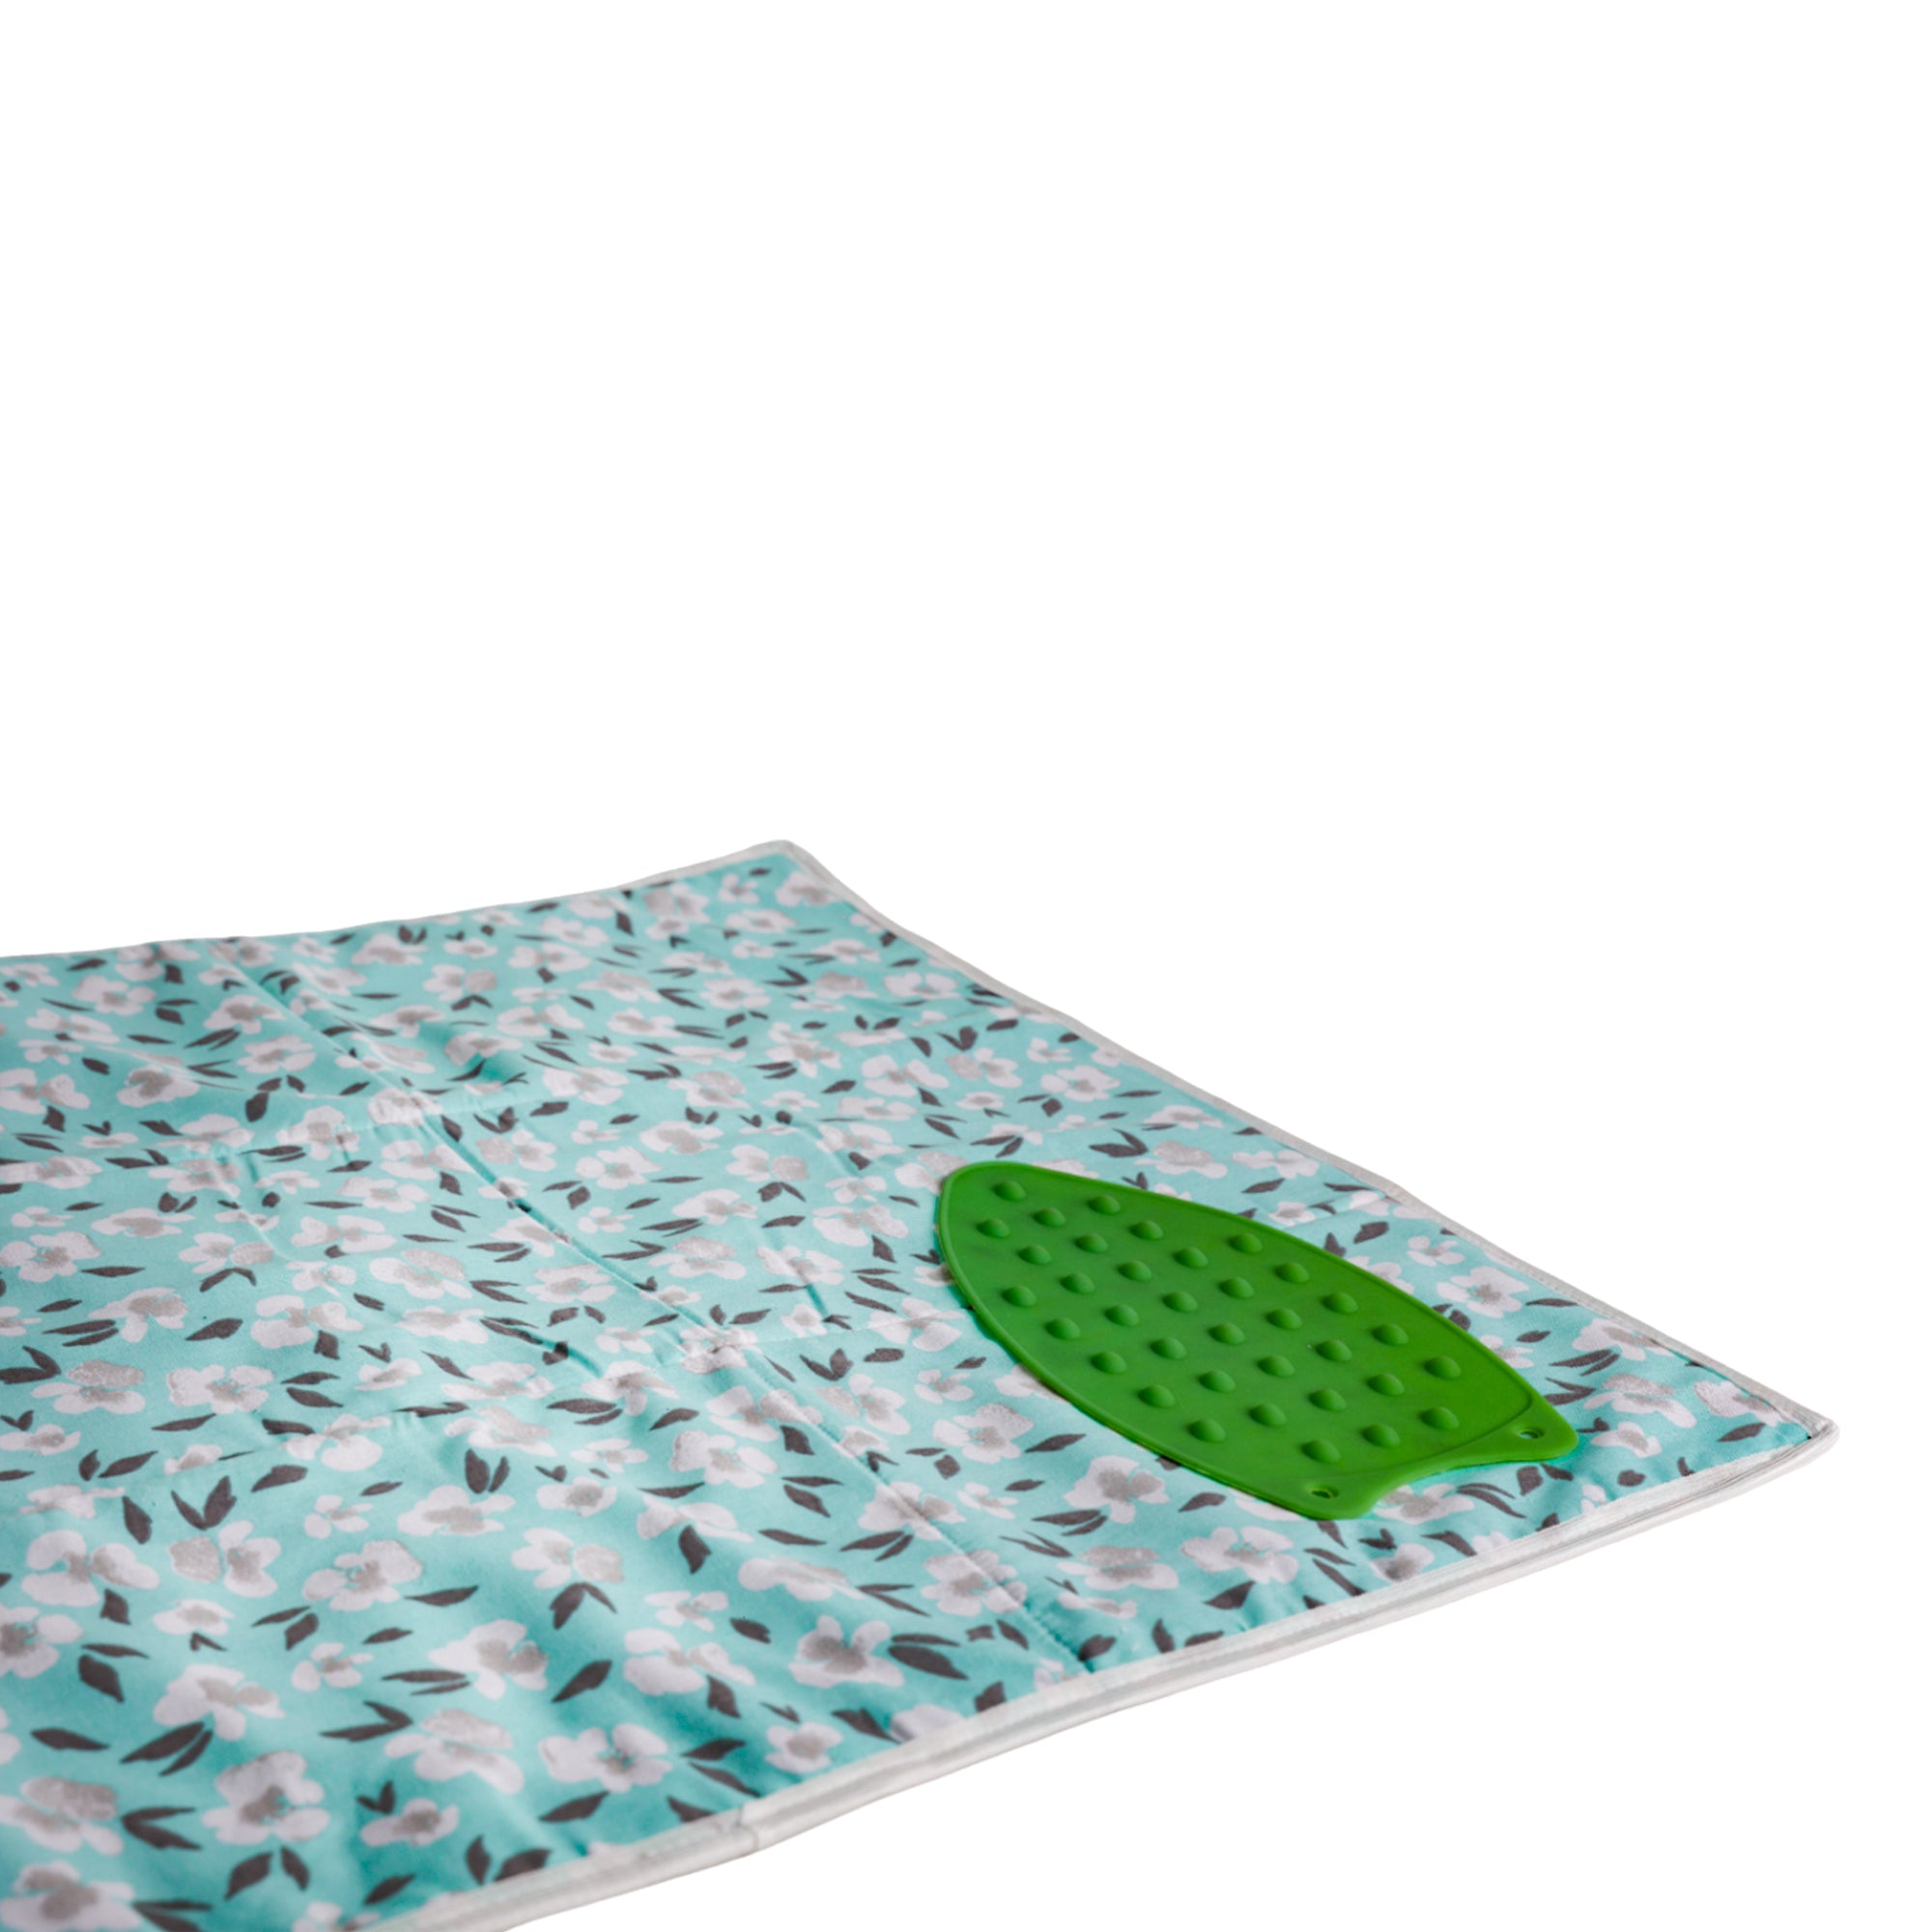 Ironing Mat (Large 120 x 70 cm) I Silicone Iron Rest Protector I Steam Press on Table I Green